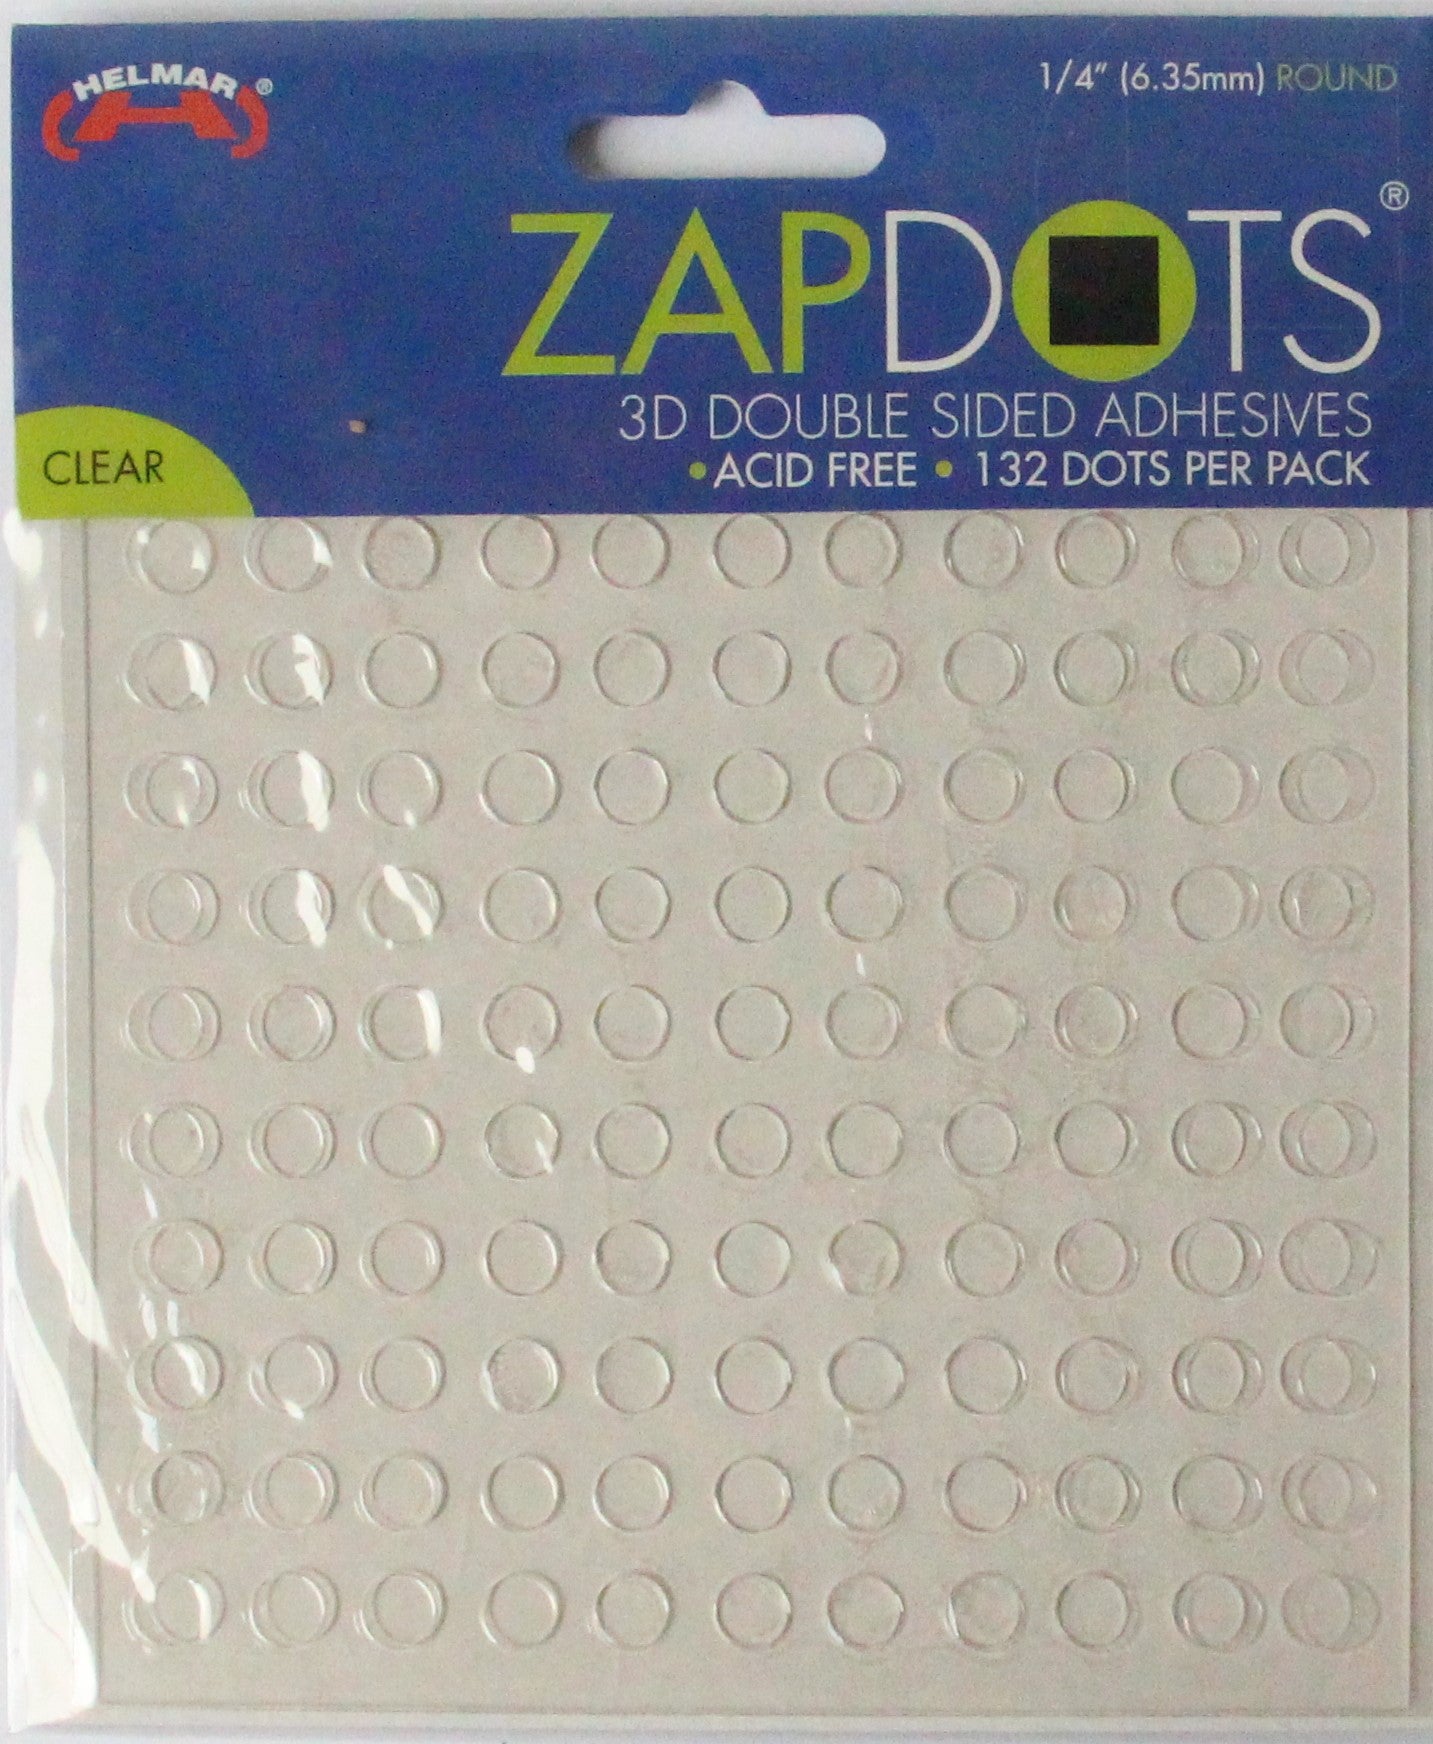 Zapdots 3D Double Sided Adhesives (Clear Circles)